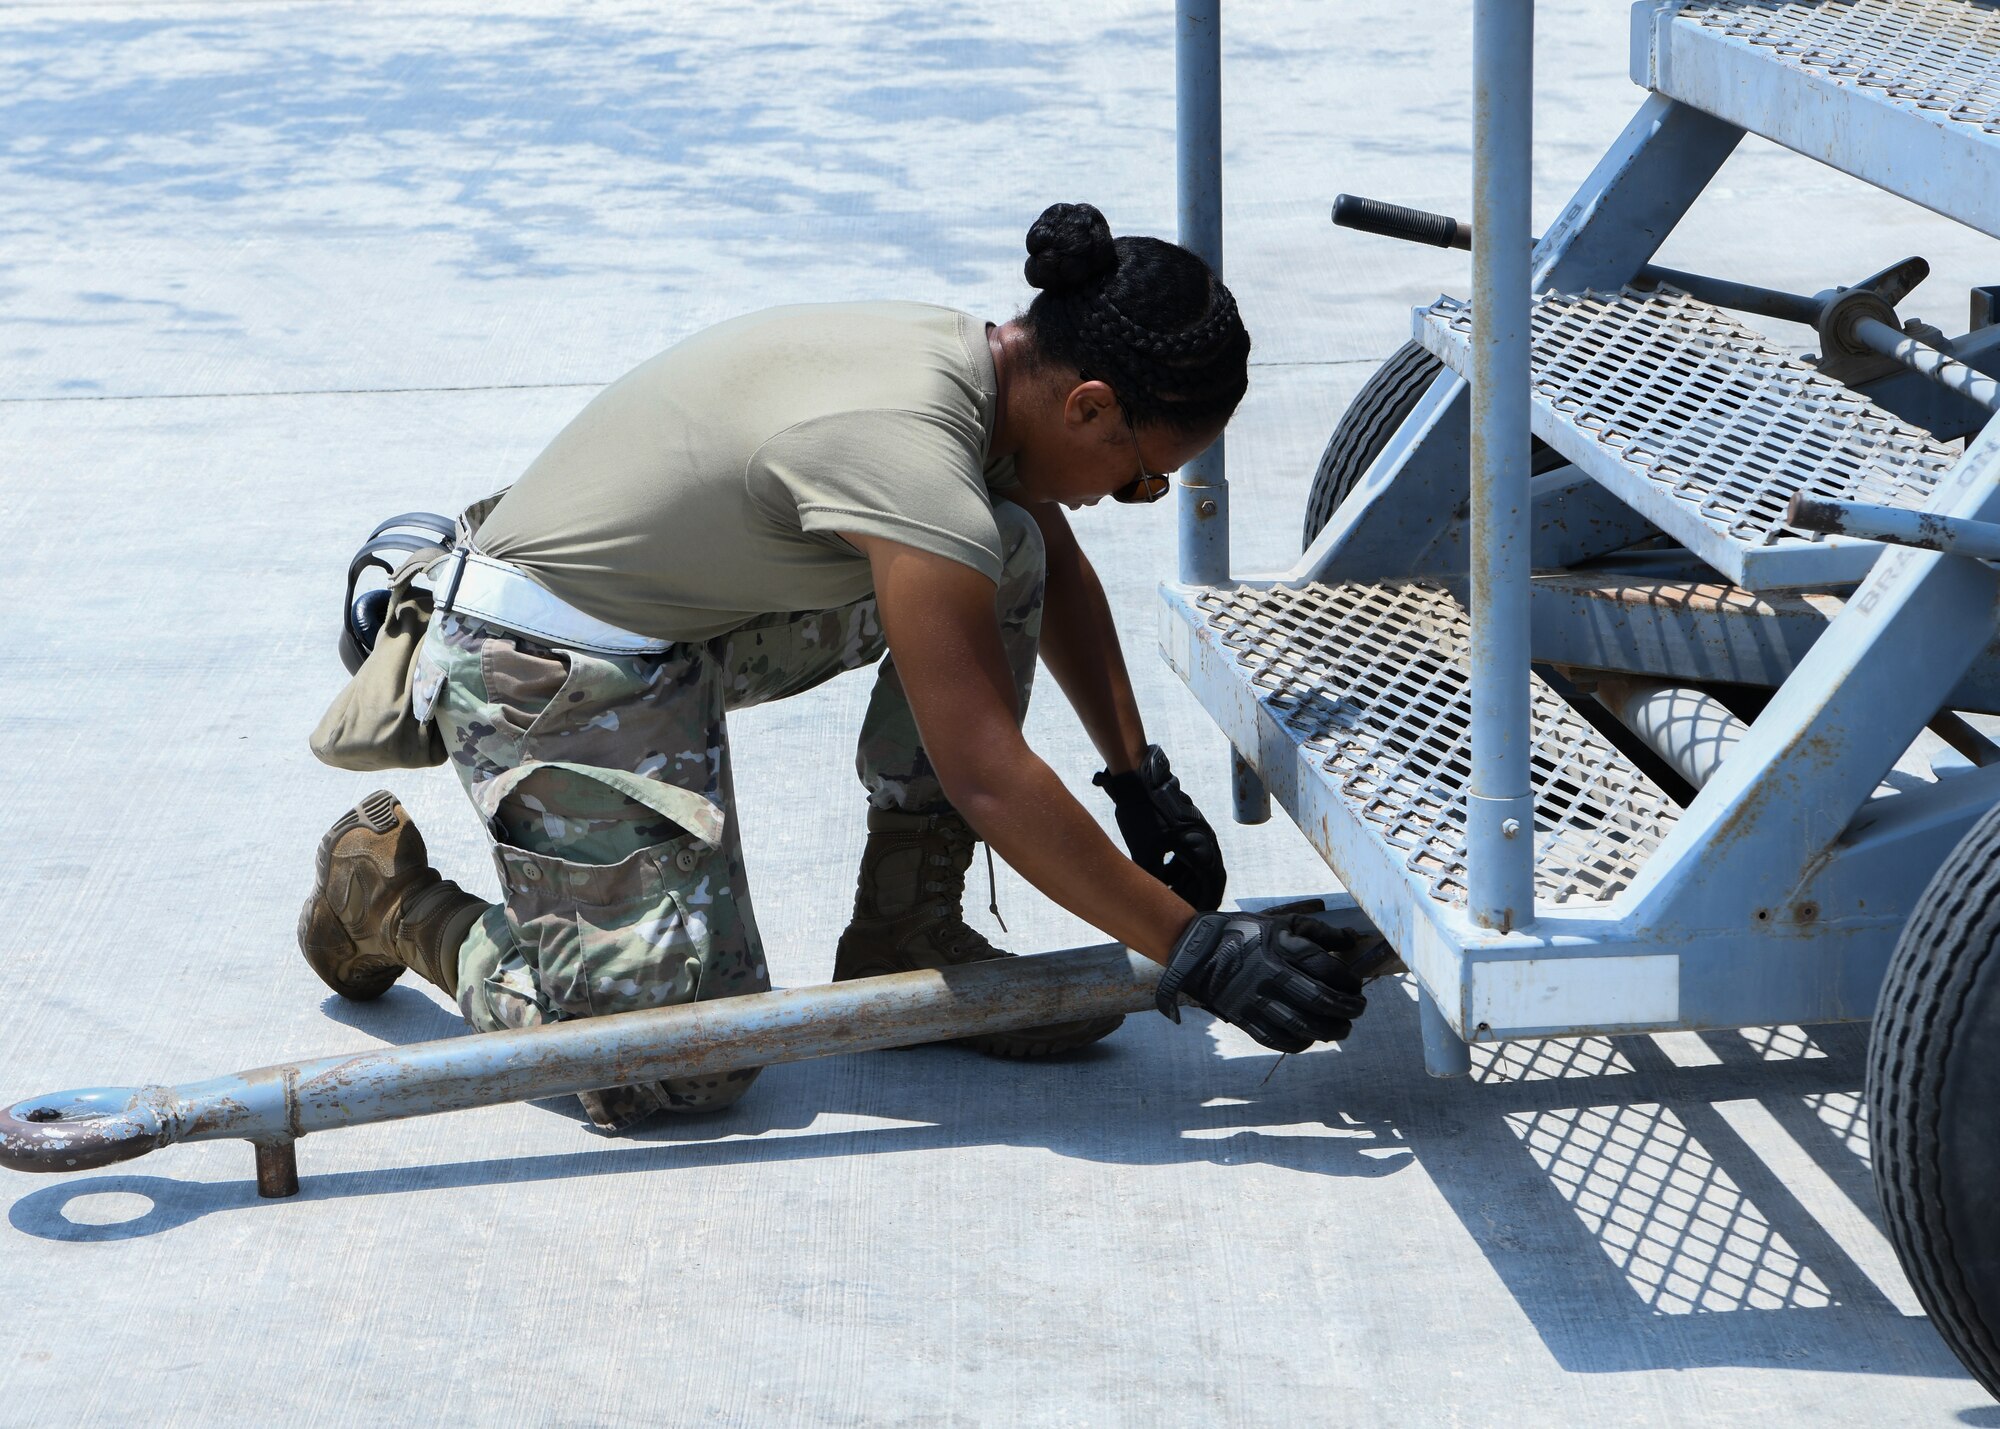 Senior Airman Brittany Cooke-McMath, a 380th Expeditionary Maintenance Squadron KC-10 Extender crew chief, prepares to move stairs before the aircraft takes off at Al Dhafra Air Base, United Arab Emirates, Aug. 18, 2020.